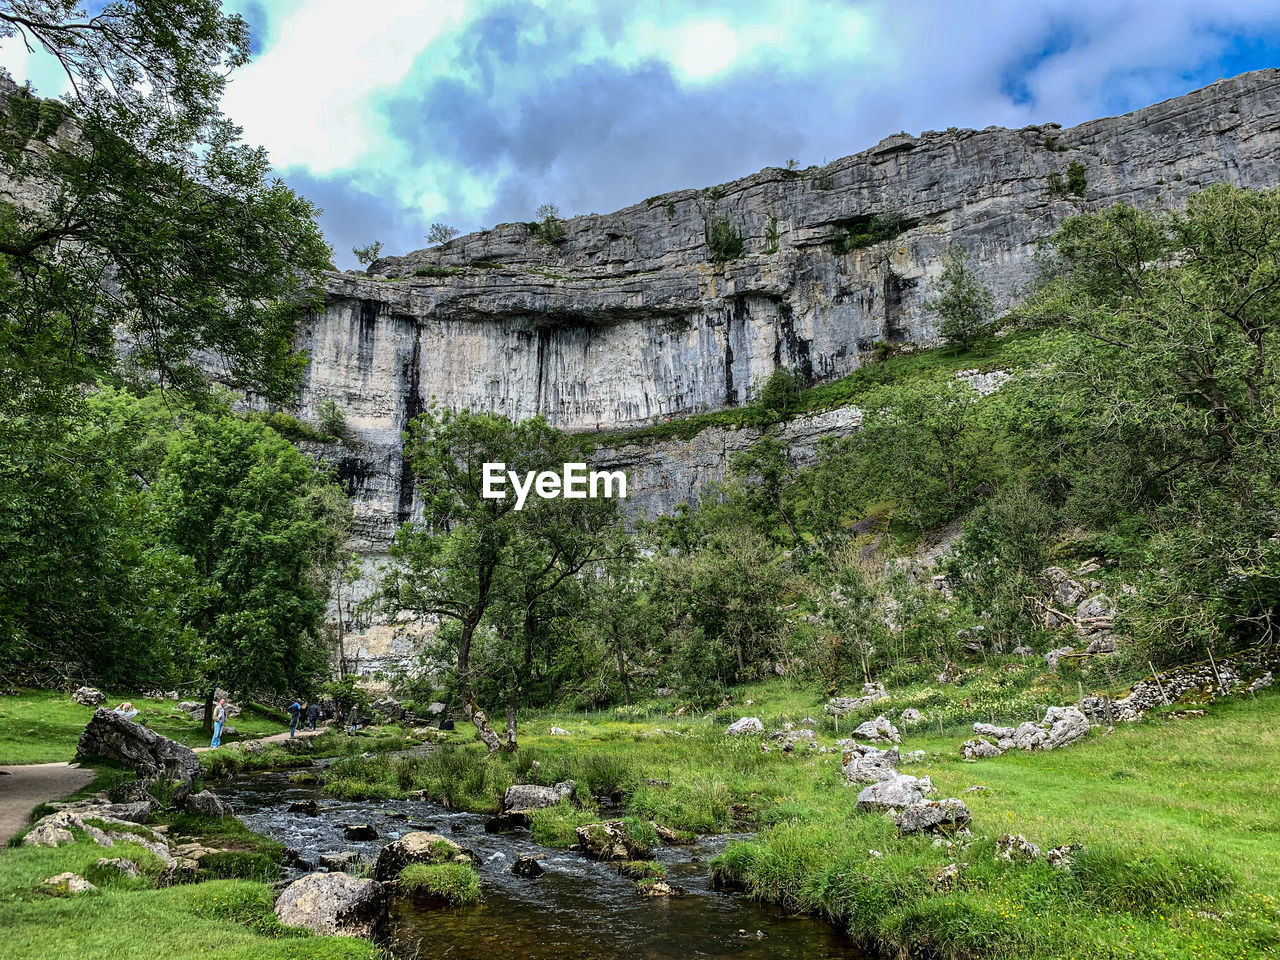 Rambling and climbing in malham cove, yorkshire dales